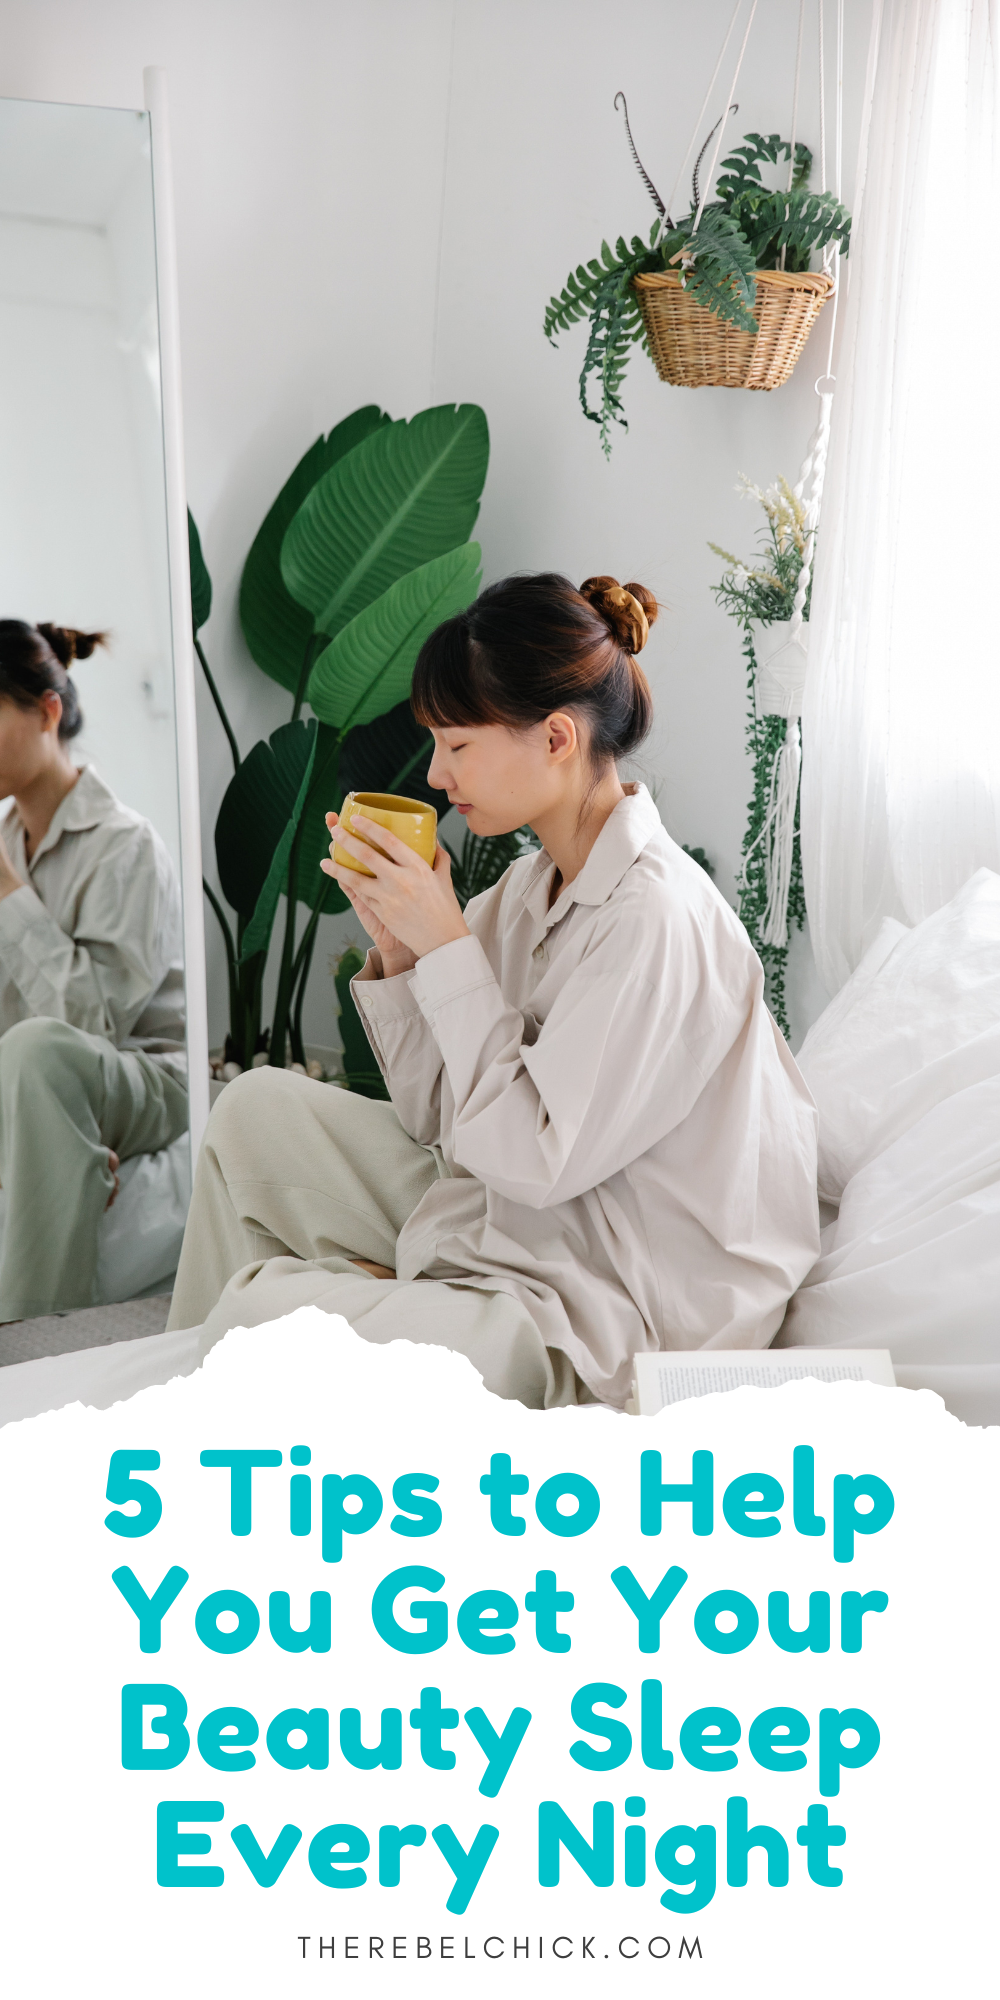 5 tips to help you get your beauty sleep every night